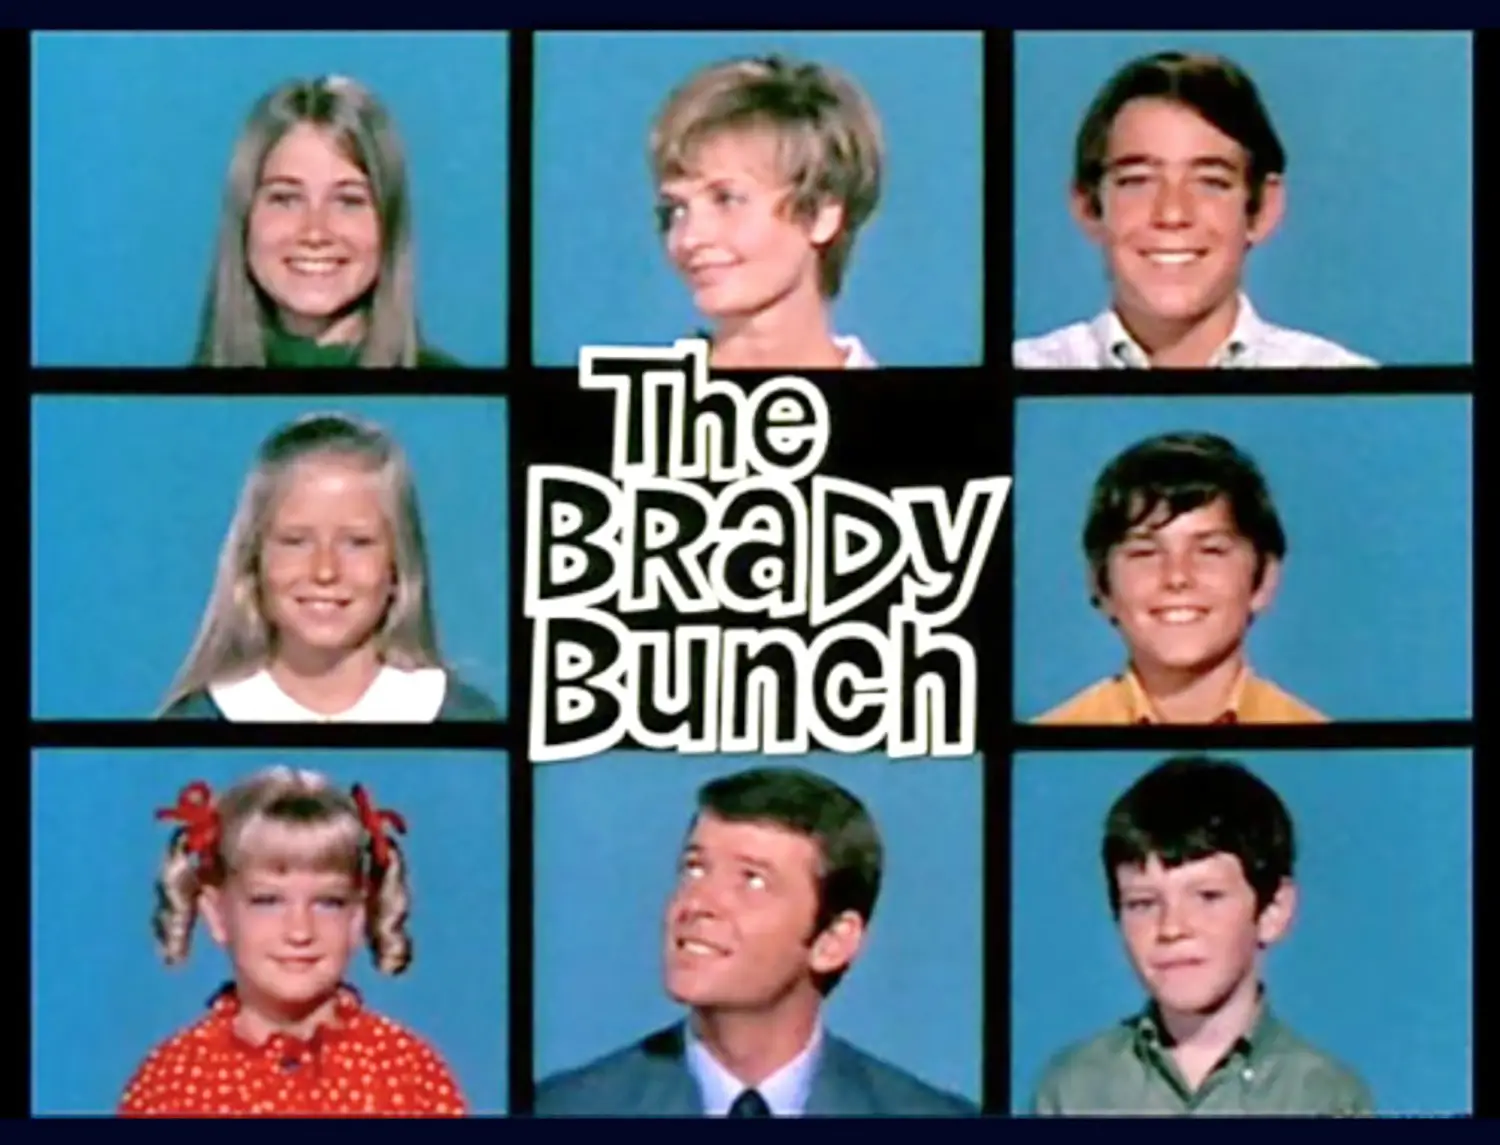 The signature grid containing the cast members of the Brady Bunch.